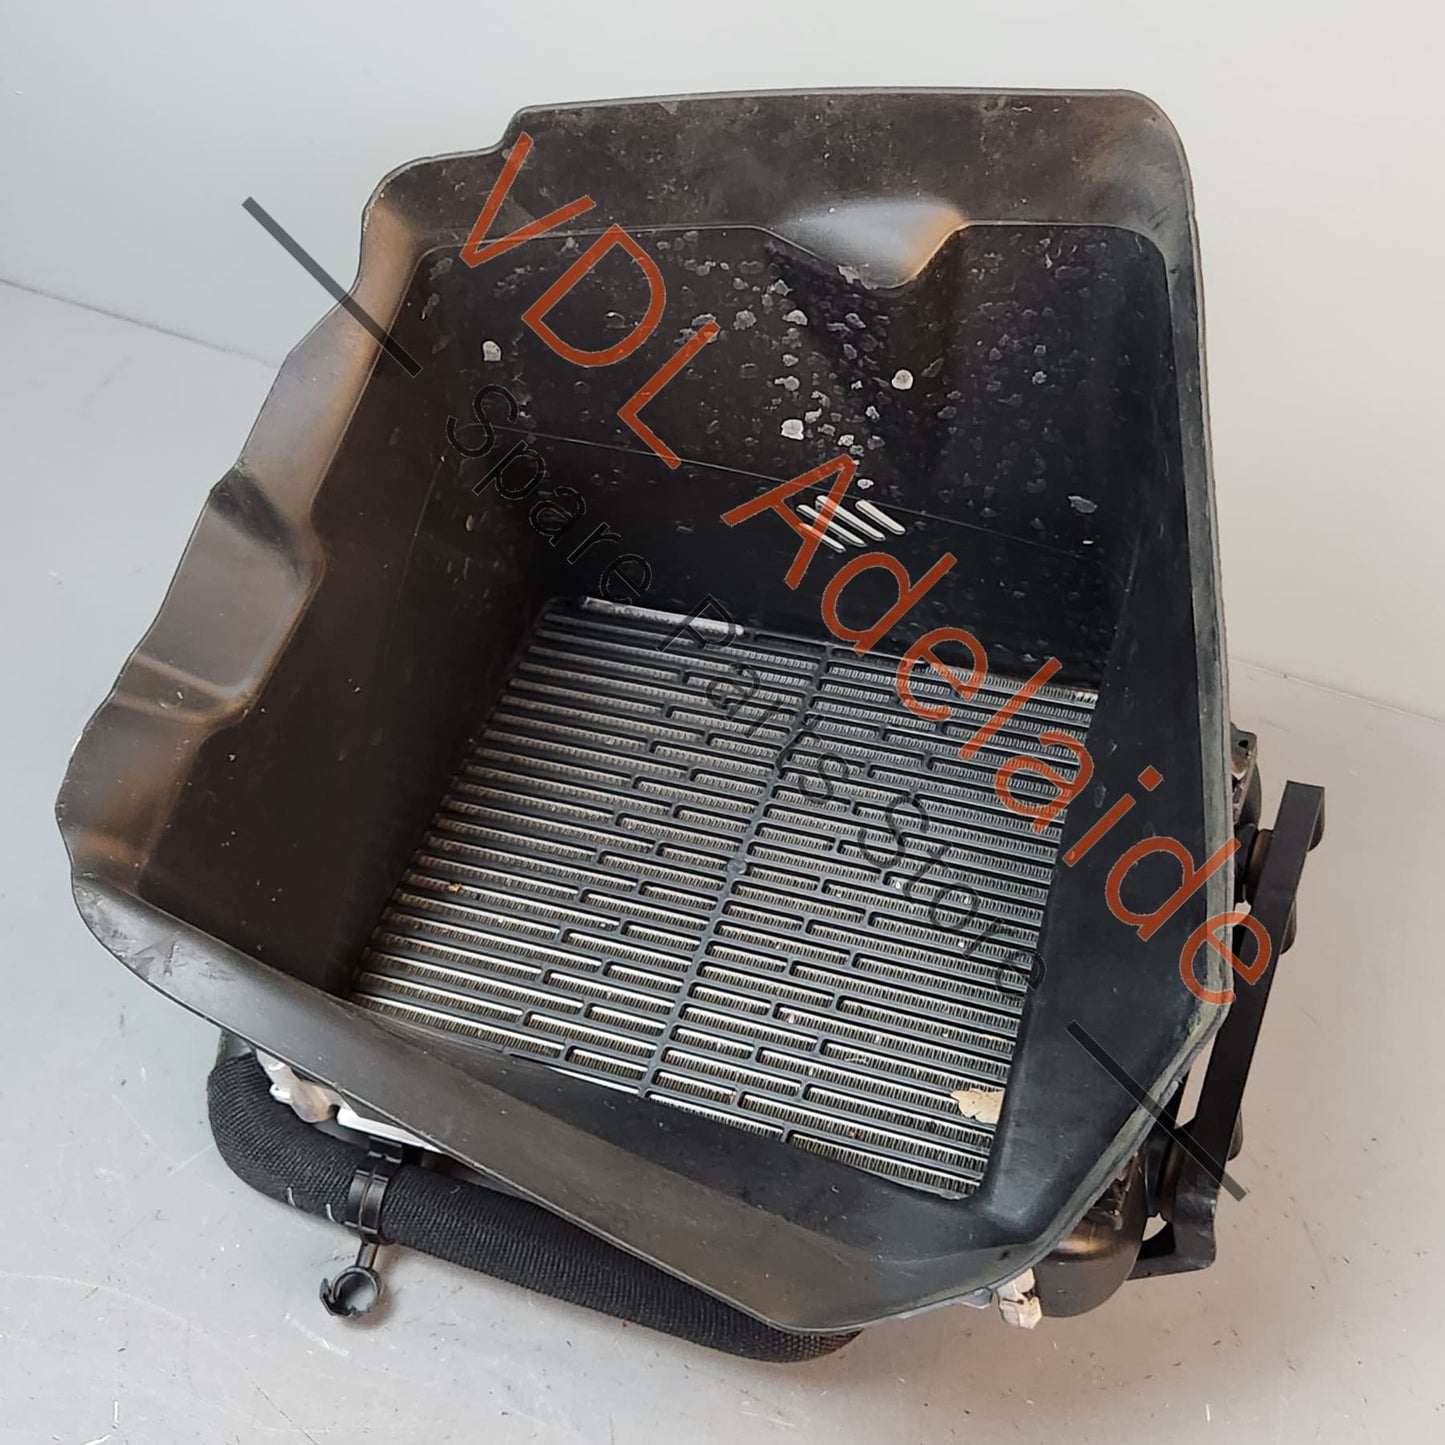 8K0121212C 83A121674B 83A121260A  Audi RSQ3 Right Side Additional Radiator Assembly 83A121260A 83A121674B 8K0121212C